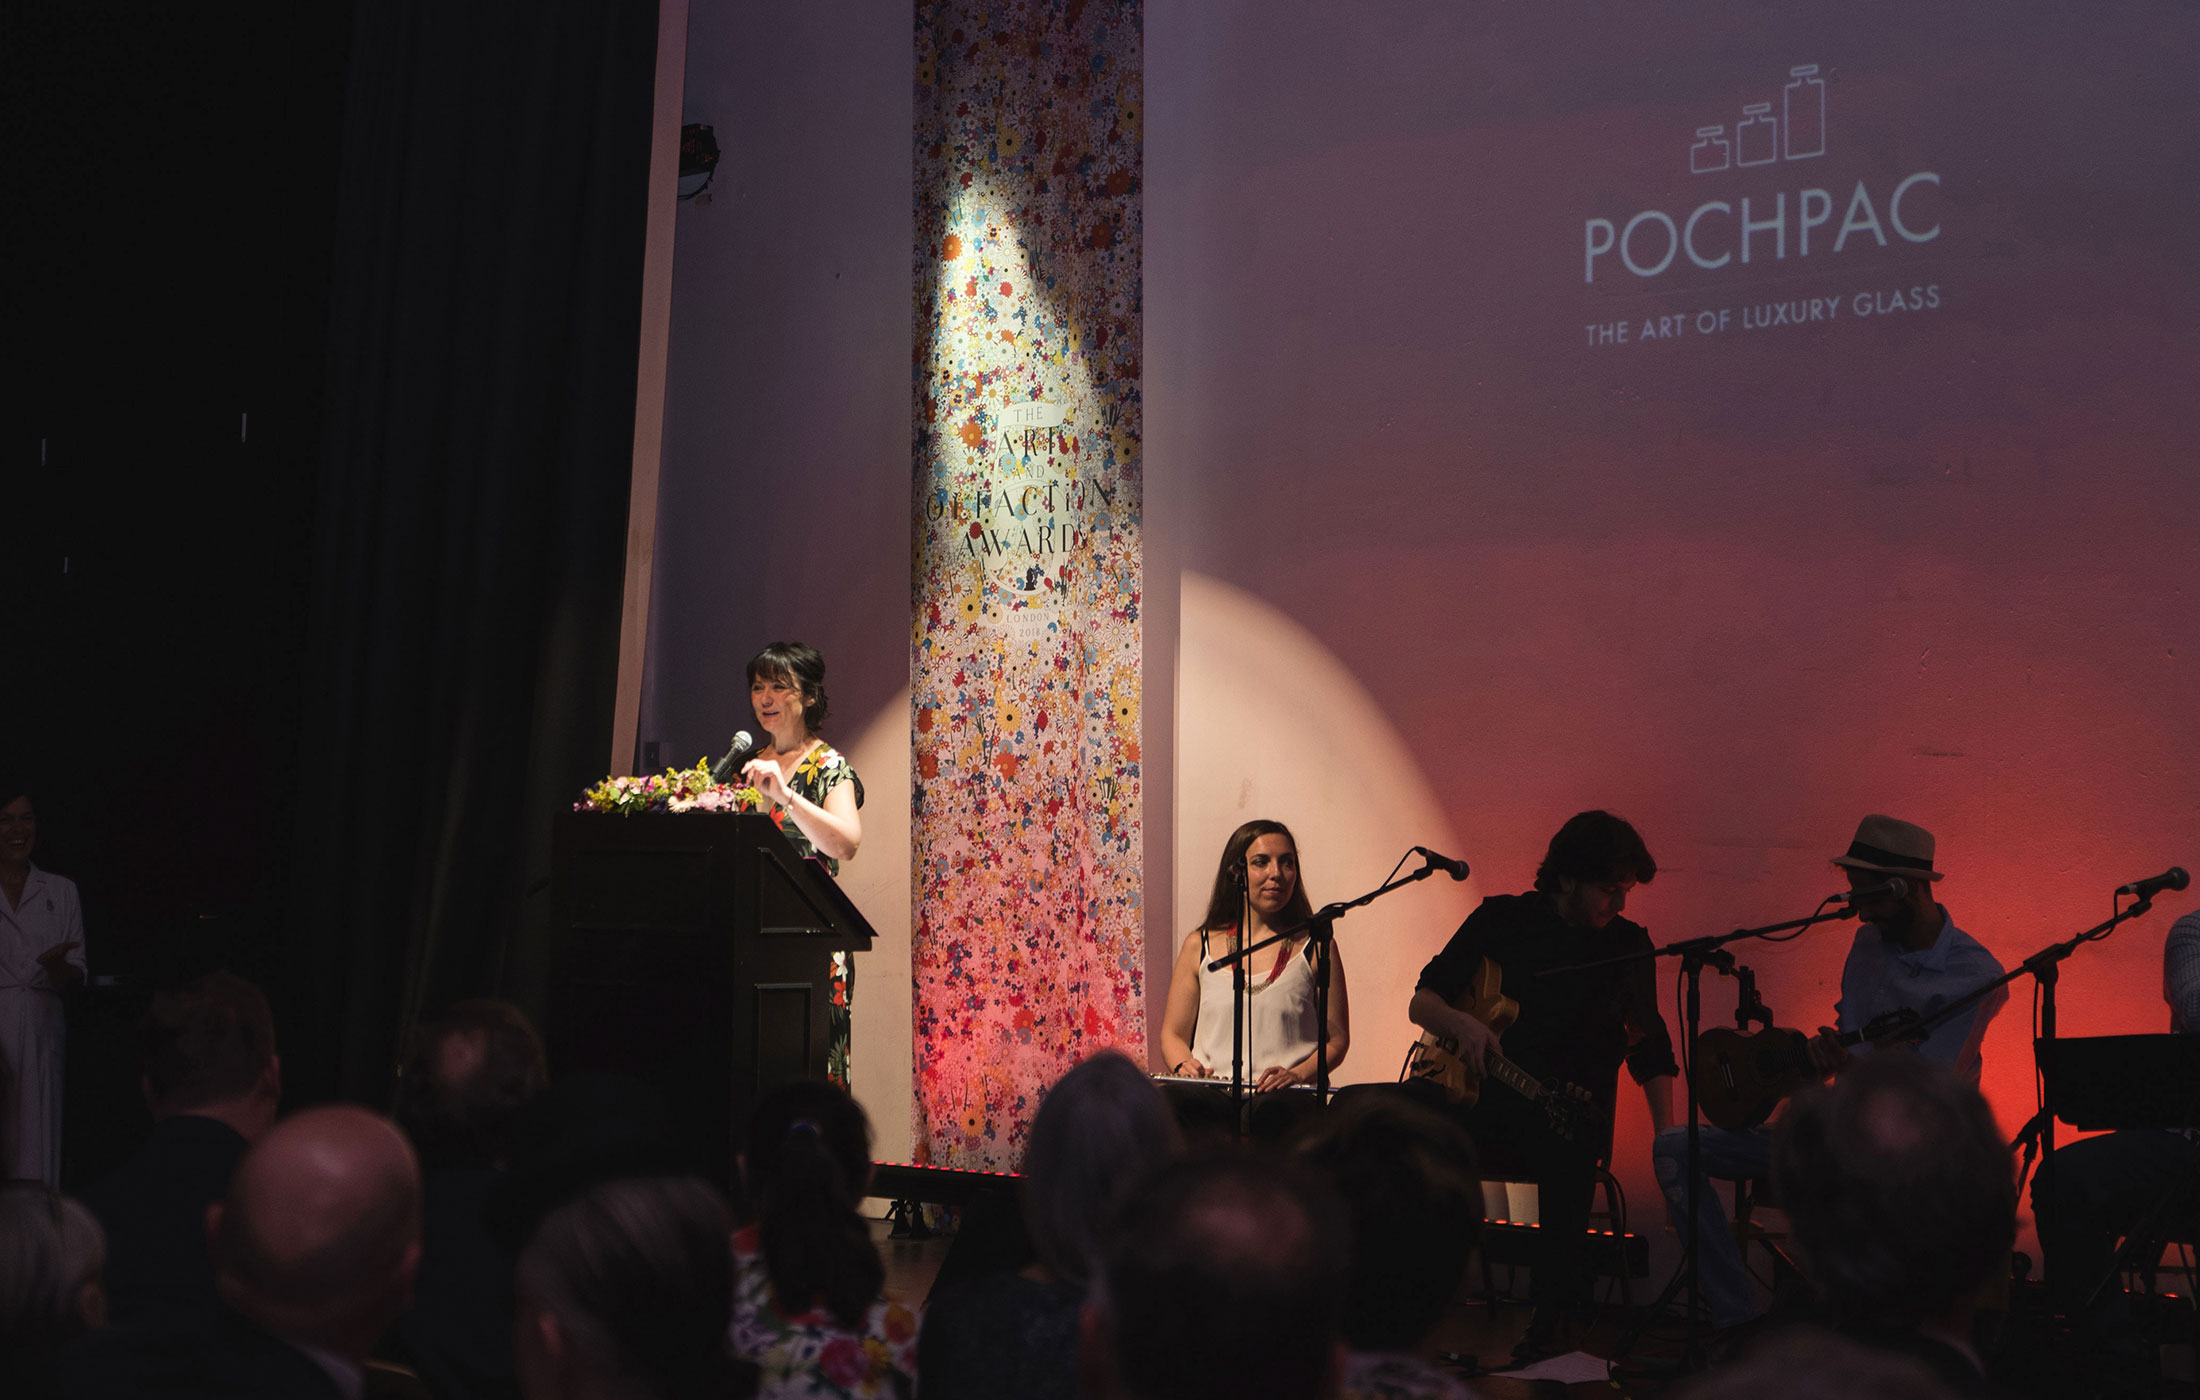 Pochpac at The Art and Olfaction Awards, Photo by Marina Chichi